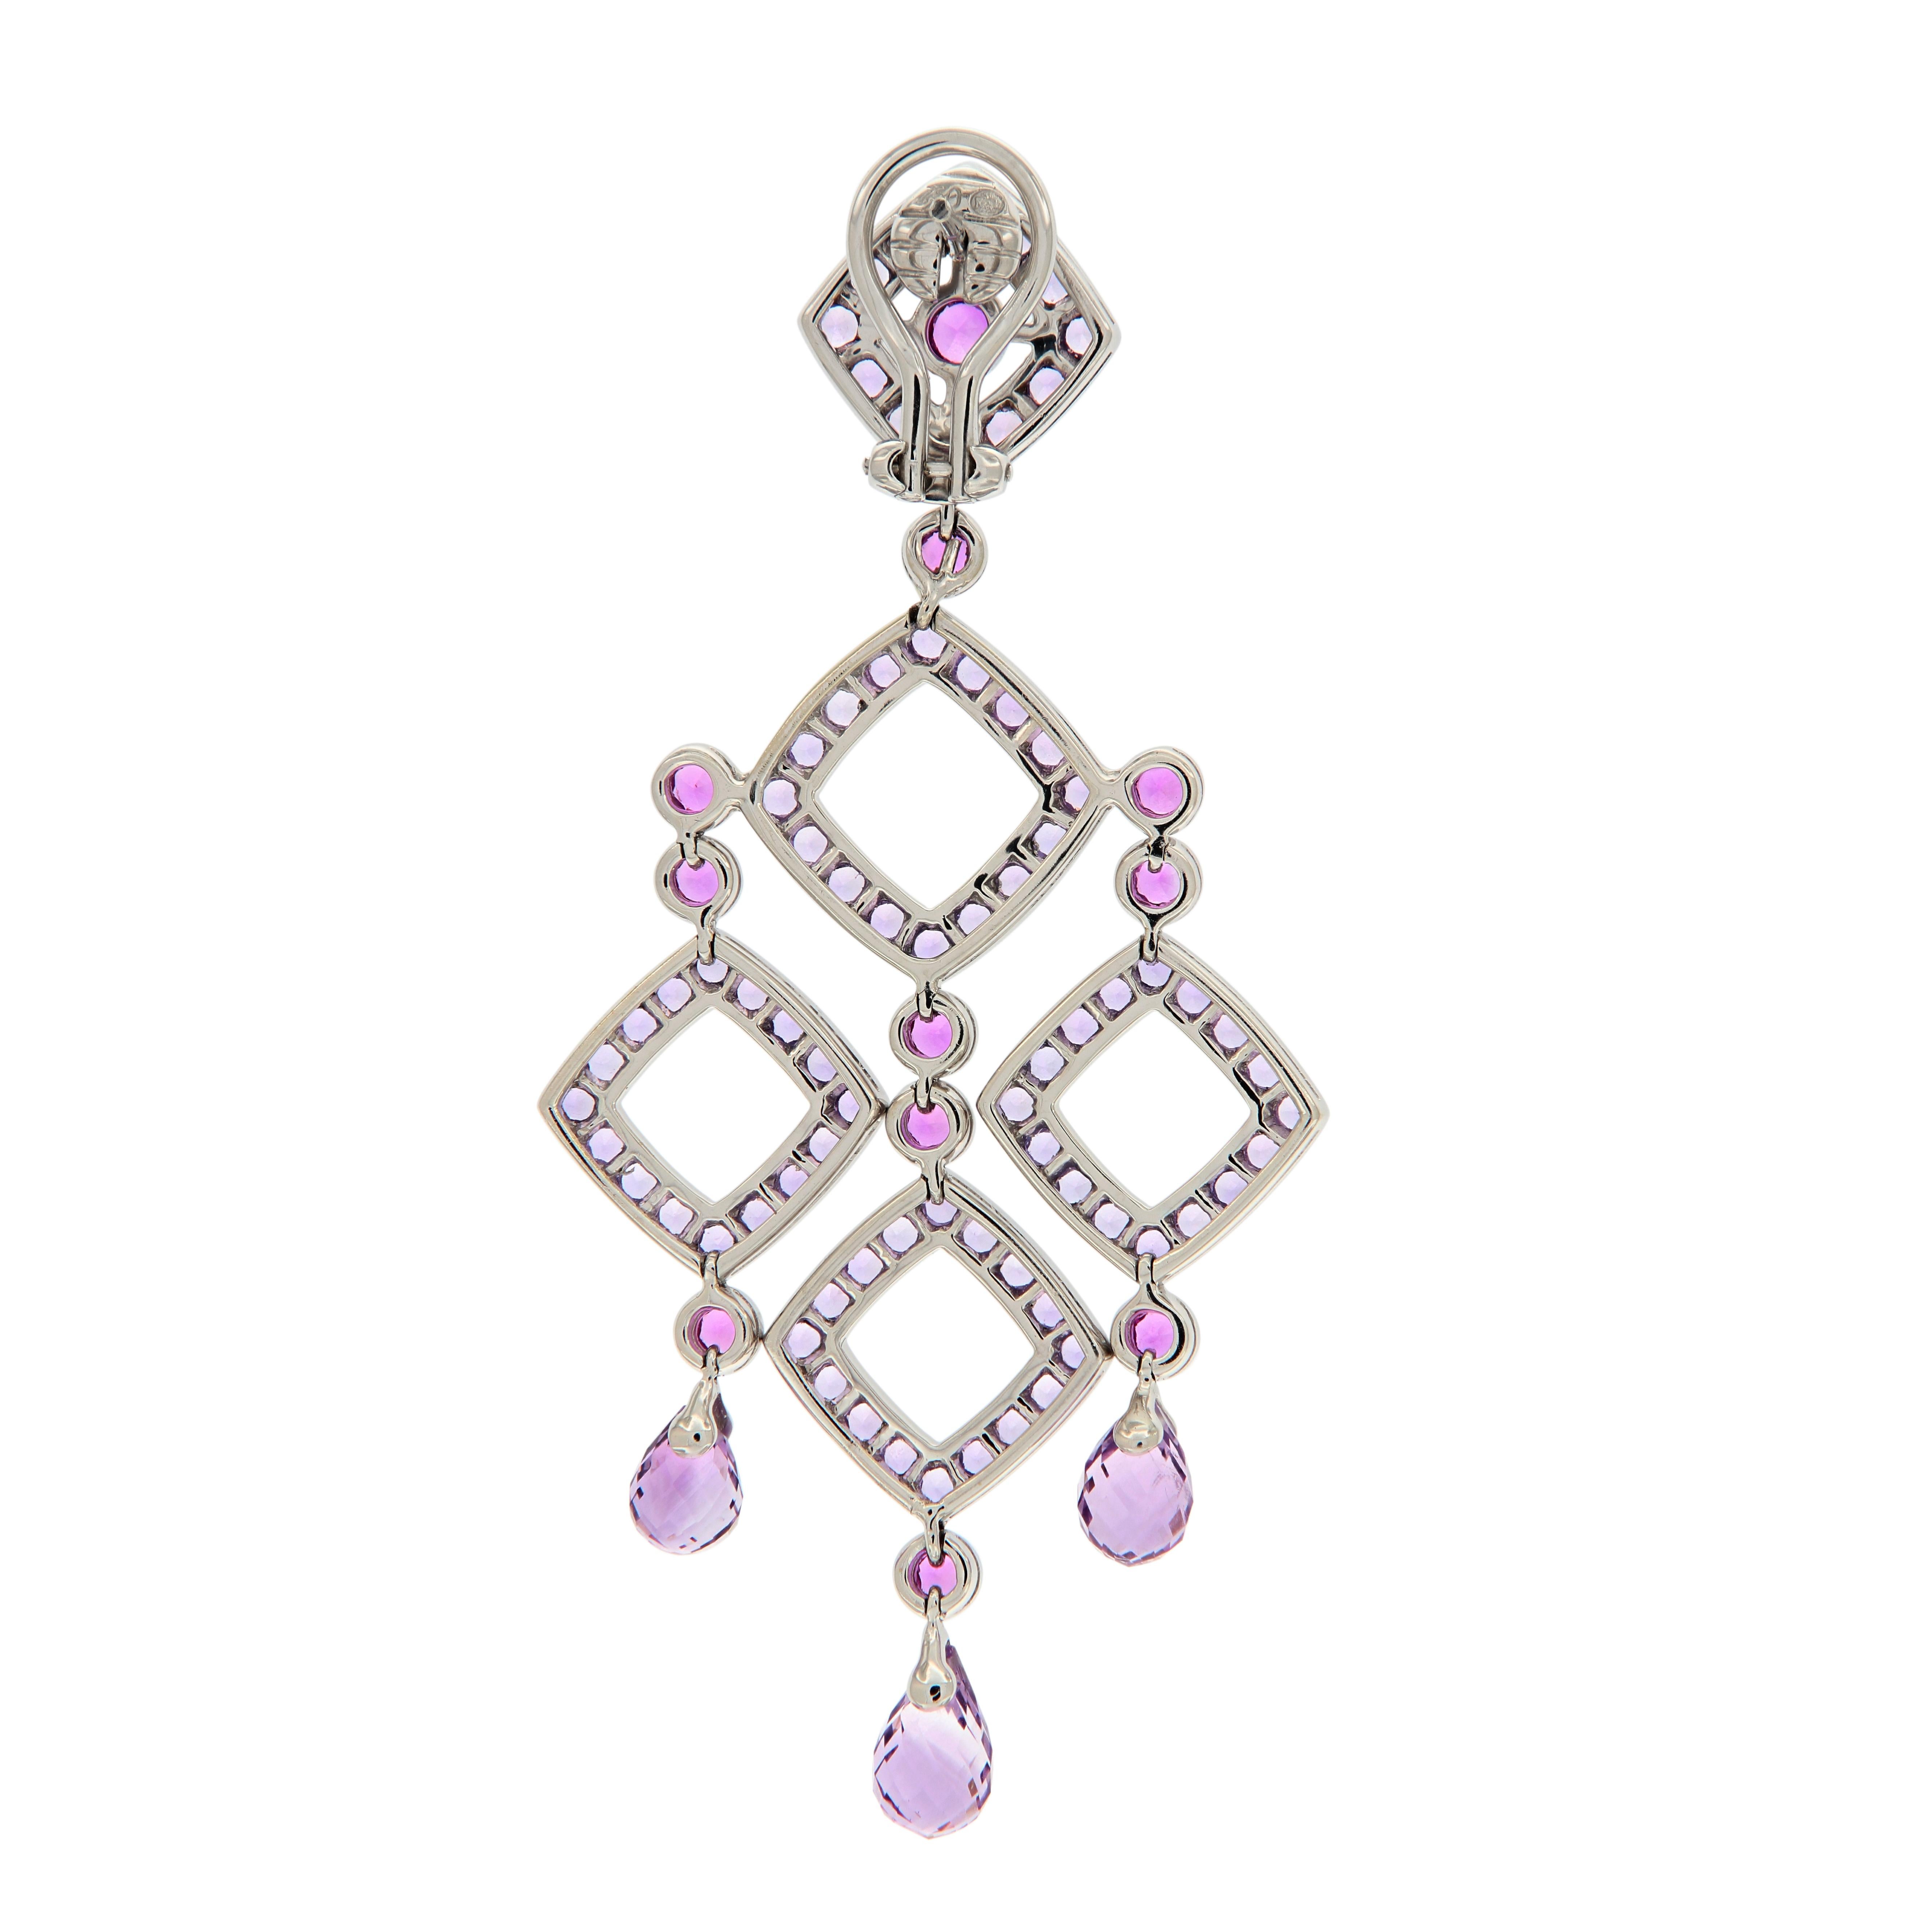 These statement chandelier earrings feature beautiful shades of violet to vibrant pink. Amethyst briolettes suspend from openwork geometric shapes connected by bezel set pink & violet sapphires . 1.22 inches wide by 2.5 inches long

Violet Sapphire